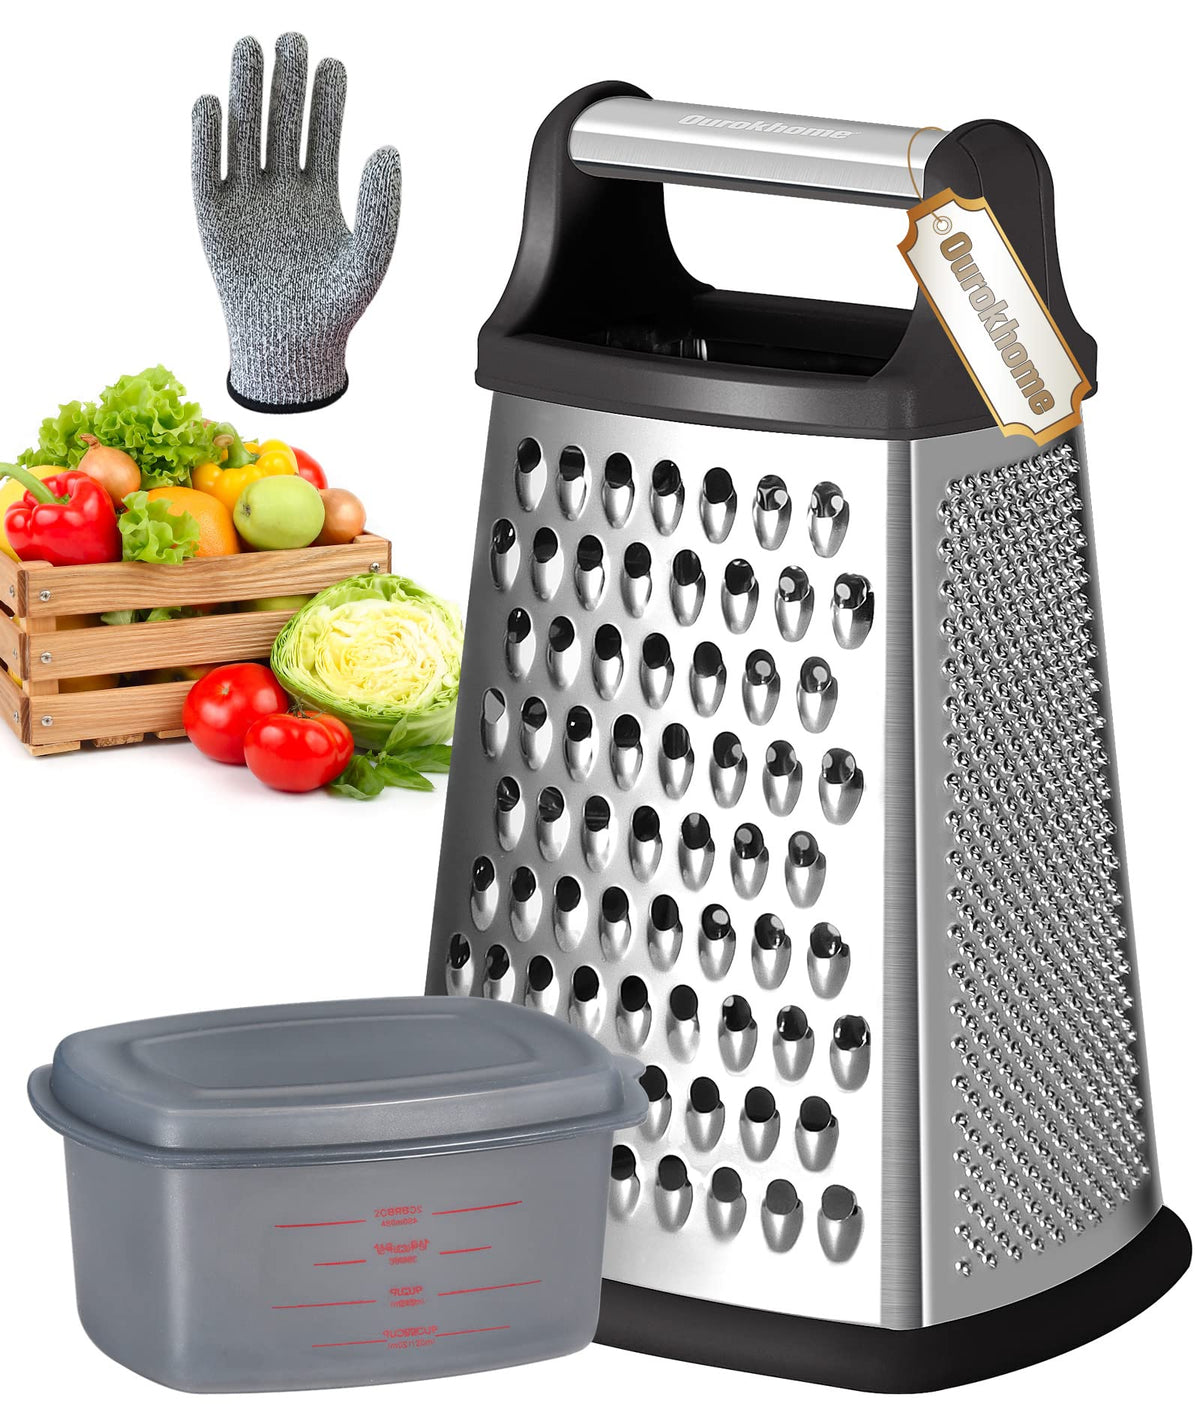  Spring Chef Professional 4 Sided Cheese Grater, Stainless Steel  with Soft Grip Handle, Handheld Kitchen Food Shredder Best Box Grater for  Parmesan Cheese, Vegetables, Ginger, 10 Black: Home & Kitchen